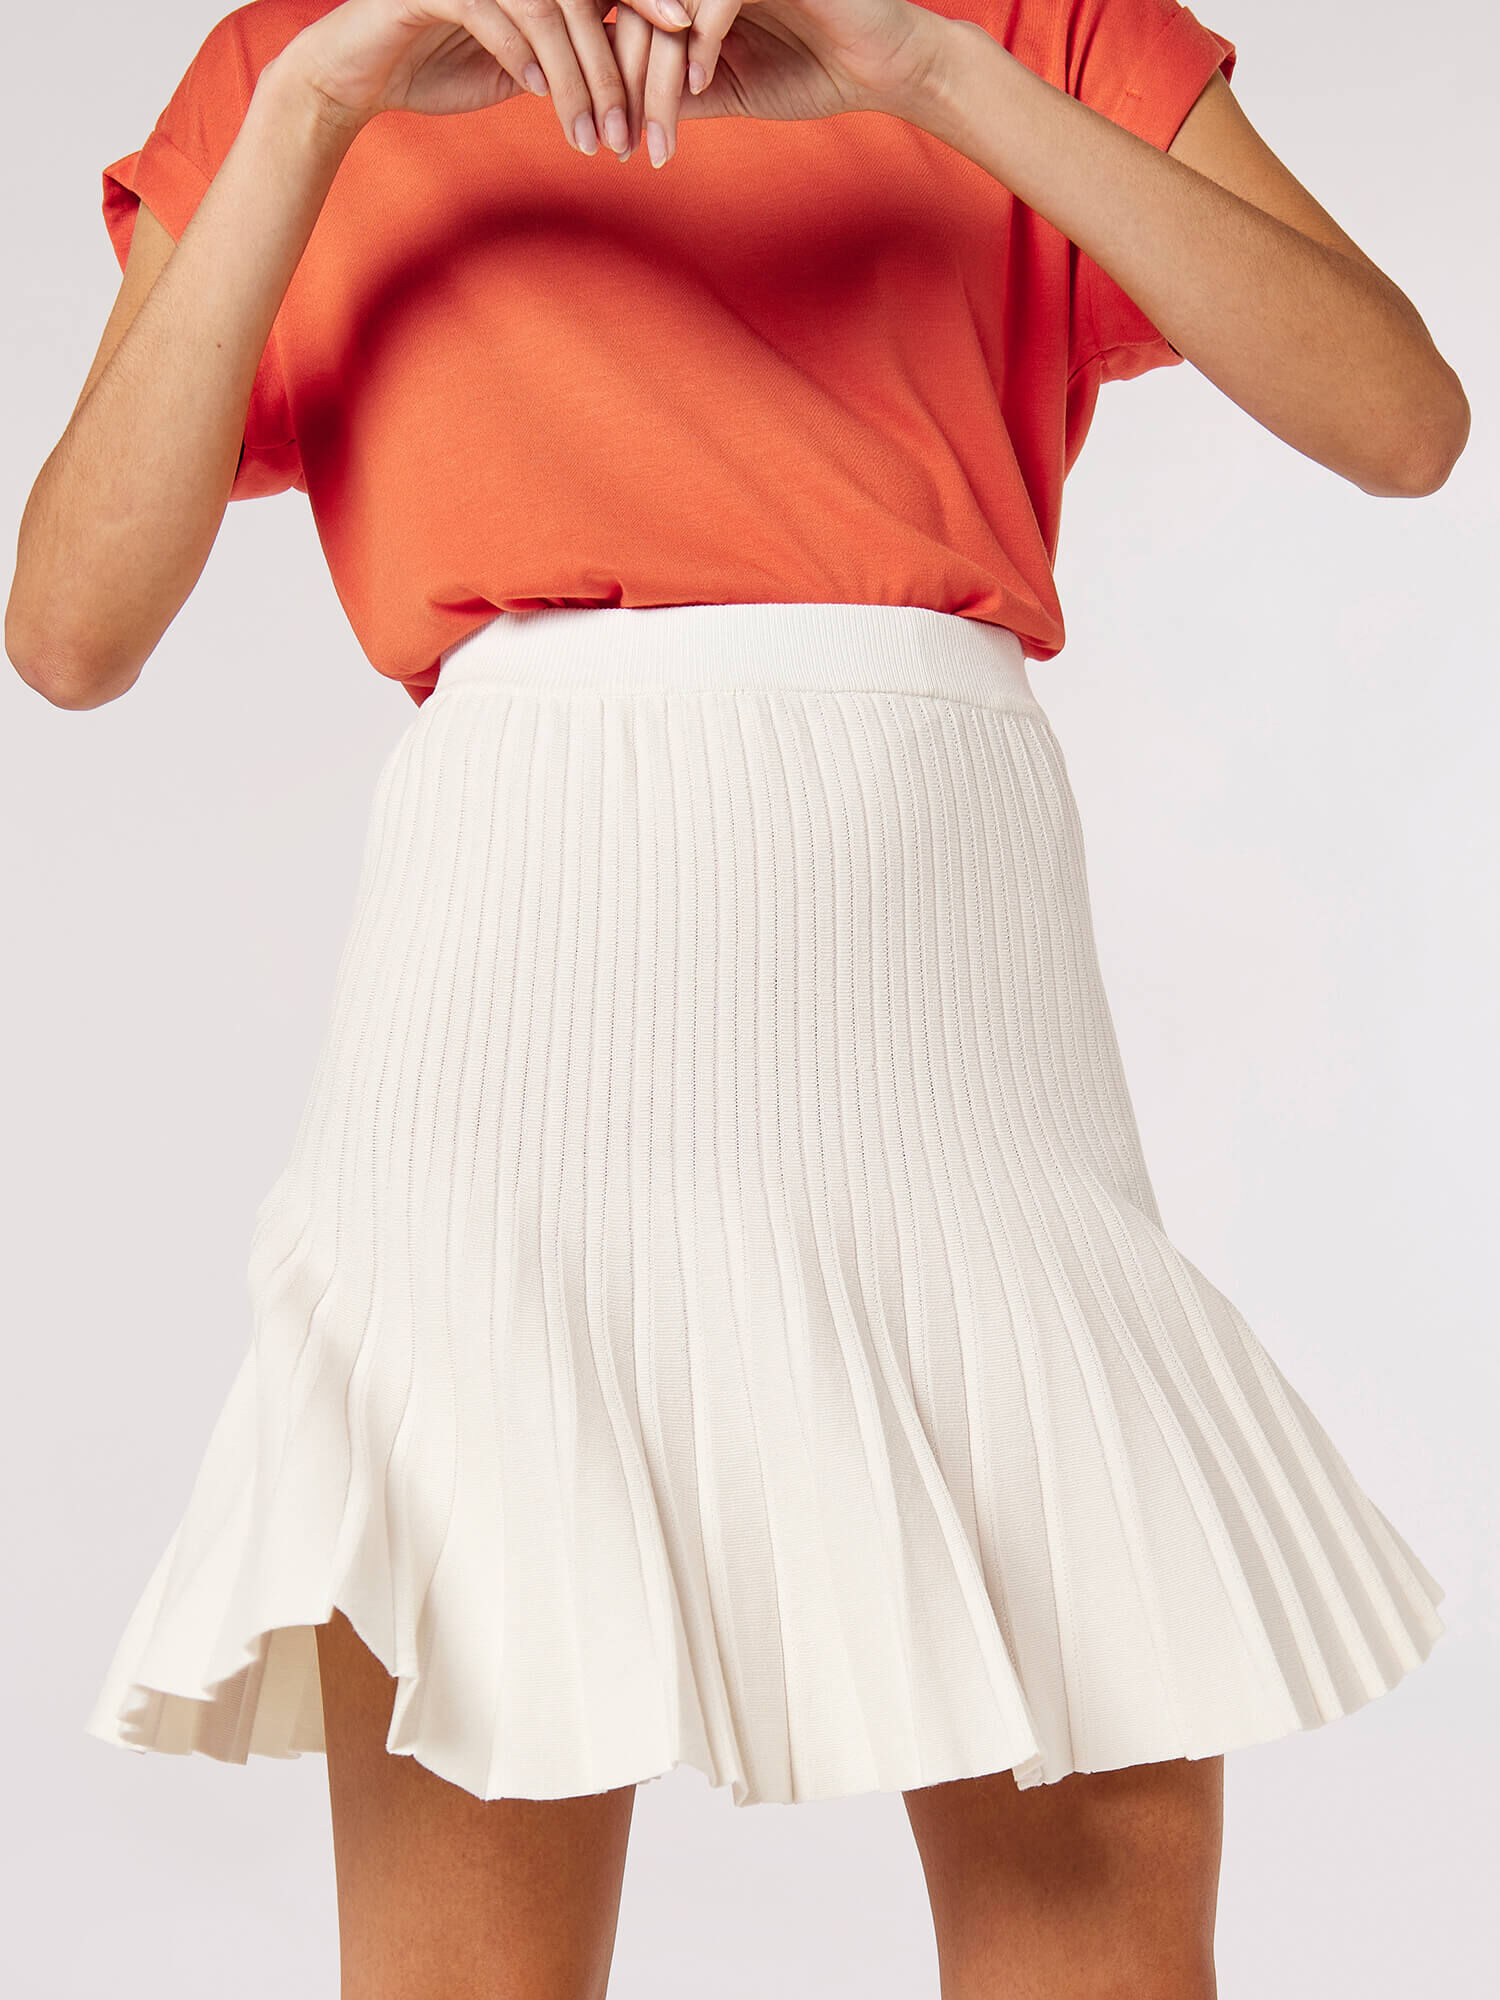 Style Review: The return of pleated skirts